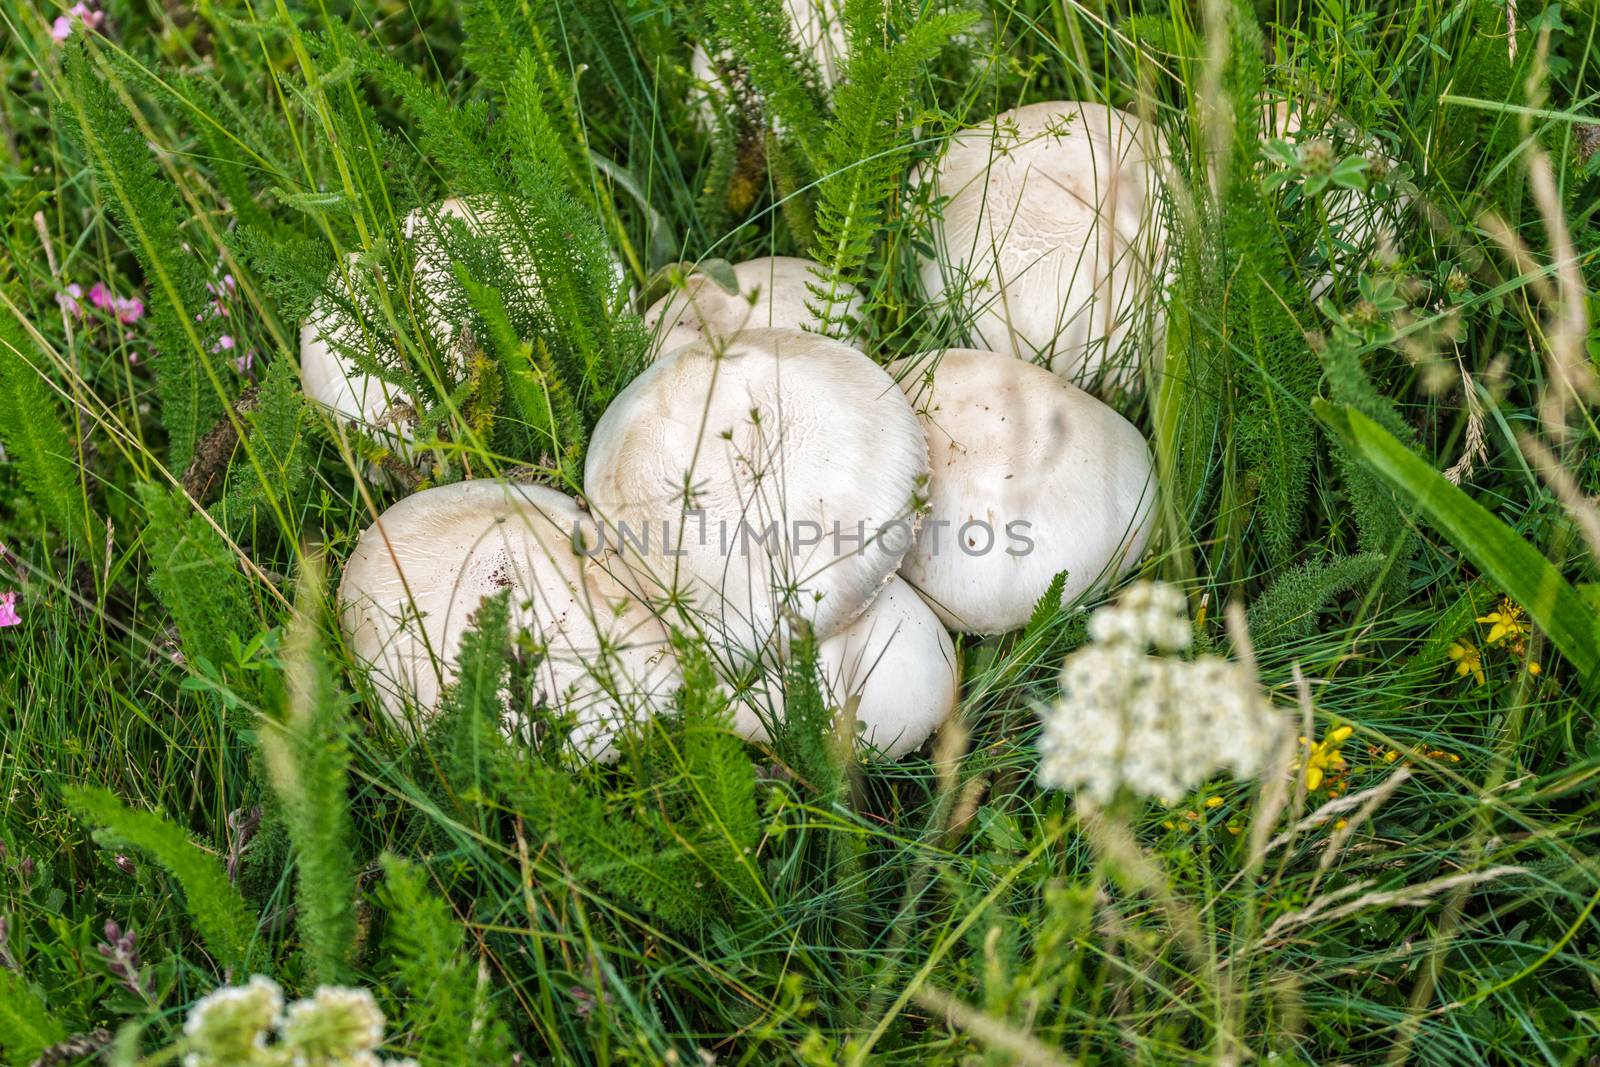 wild mushrooms are hiding in the green grass, close-up